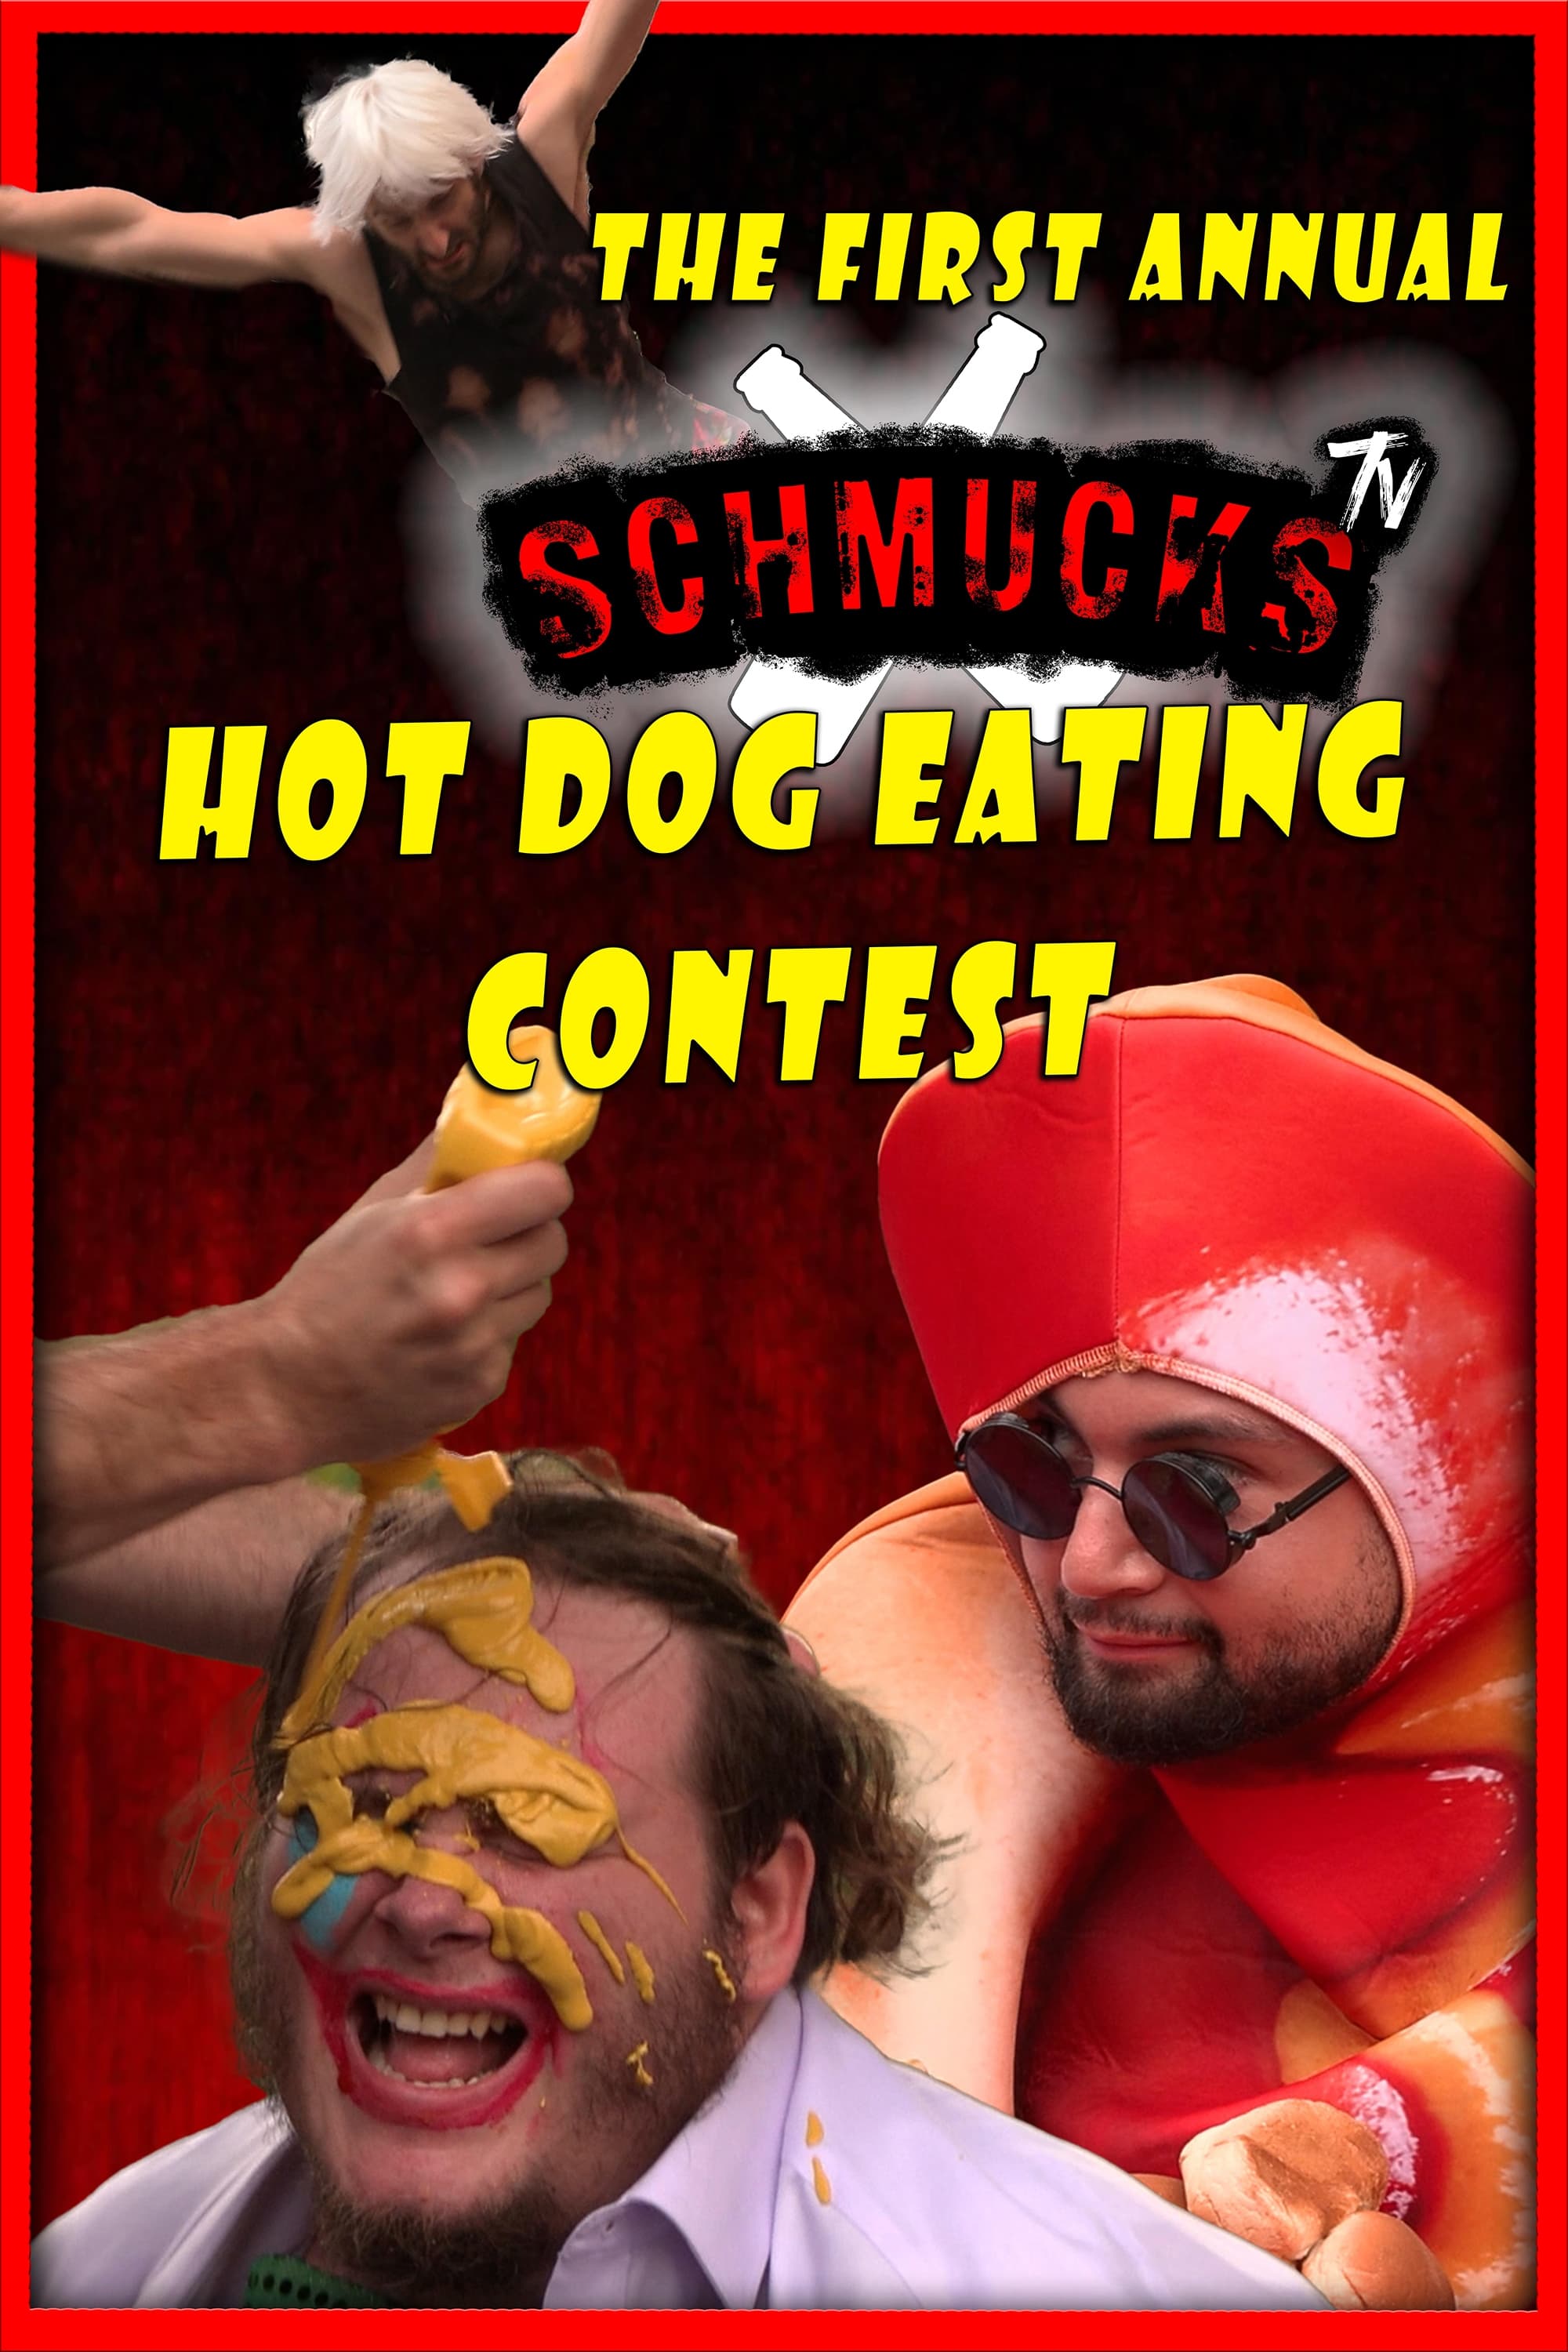 The First Annual Schmucks Hot Dog Eating Contest